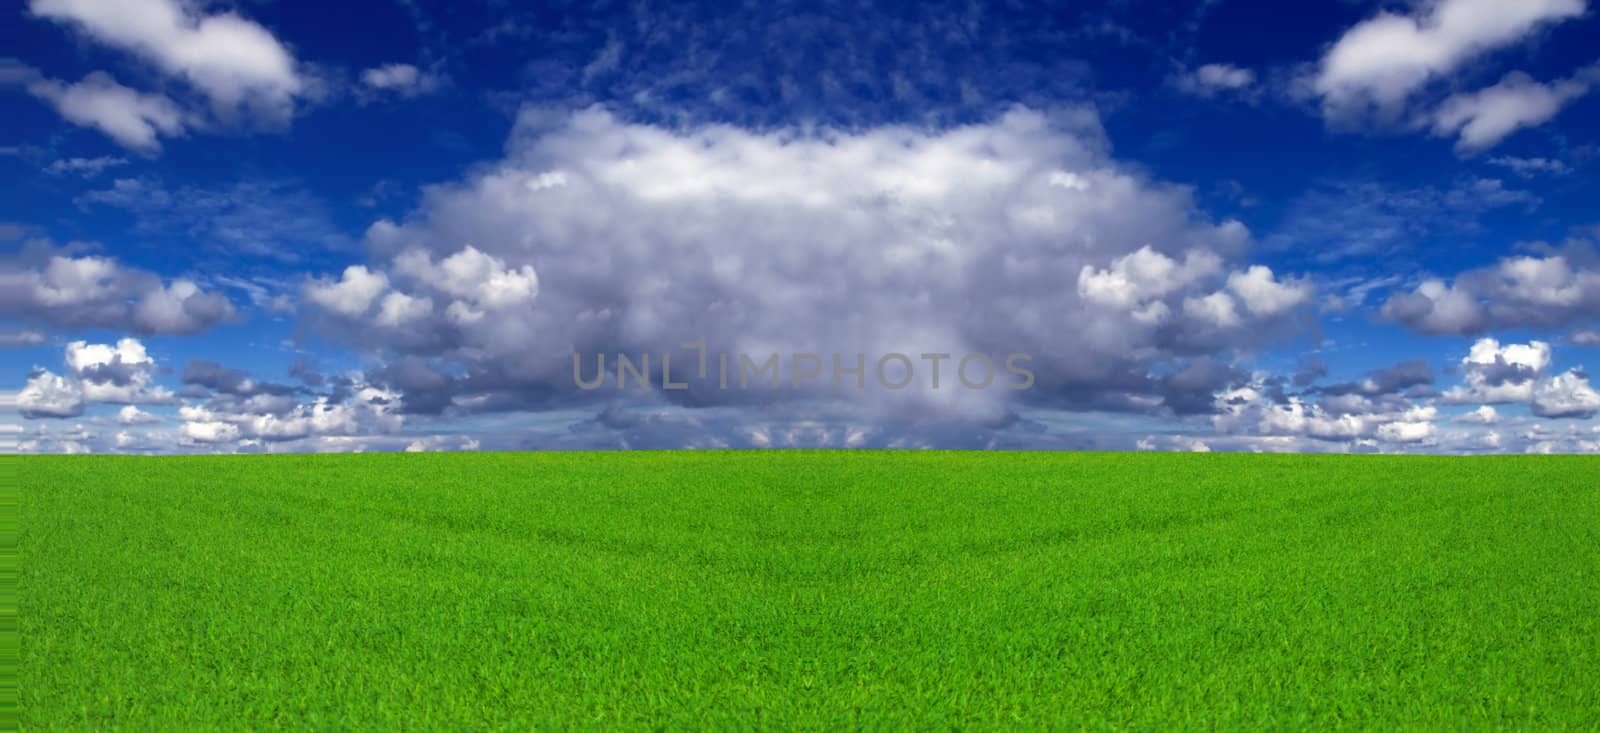 Conceptual image showing amazing blue skies over green meadows